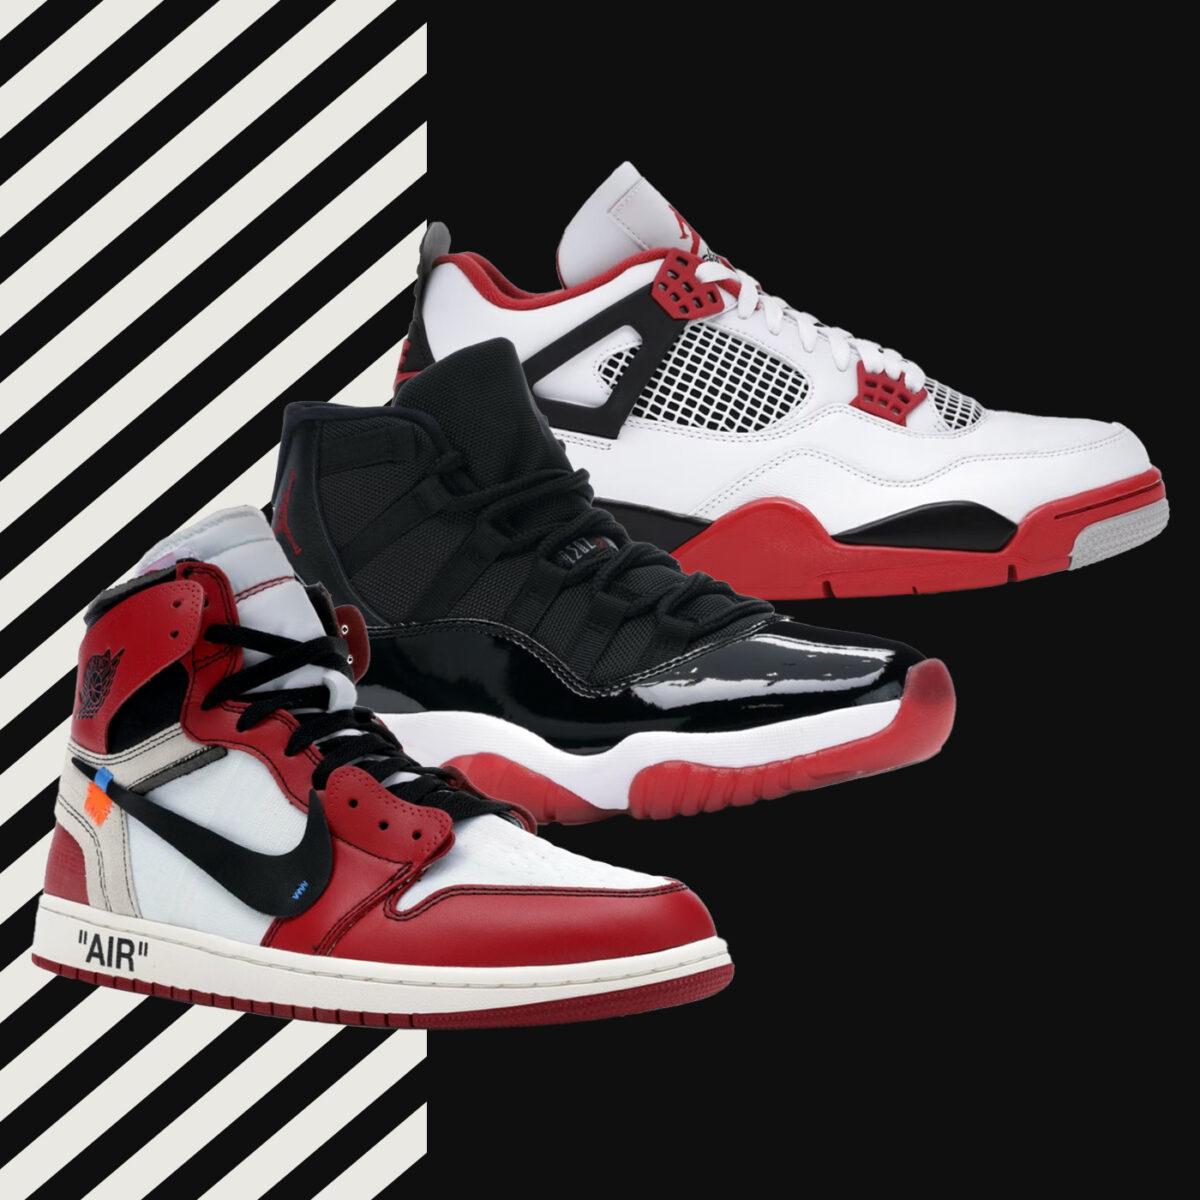 Red and White Patent Leather Jordans: Iconic Style Alert!